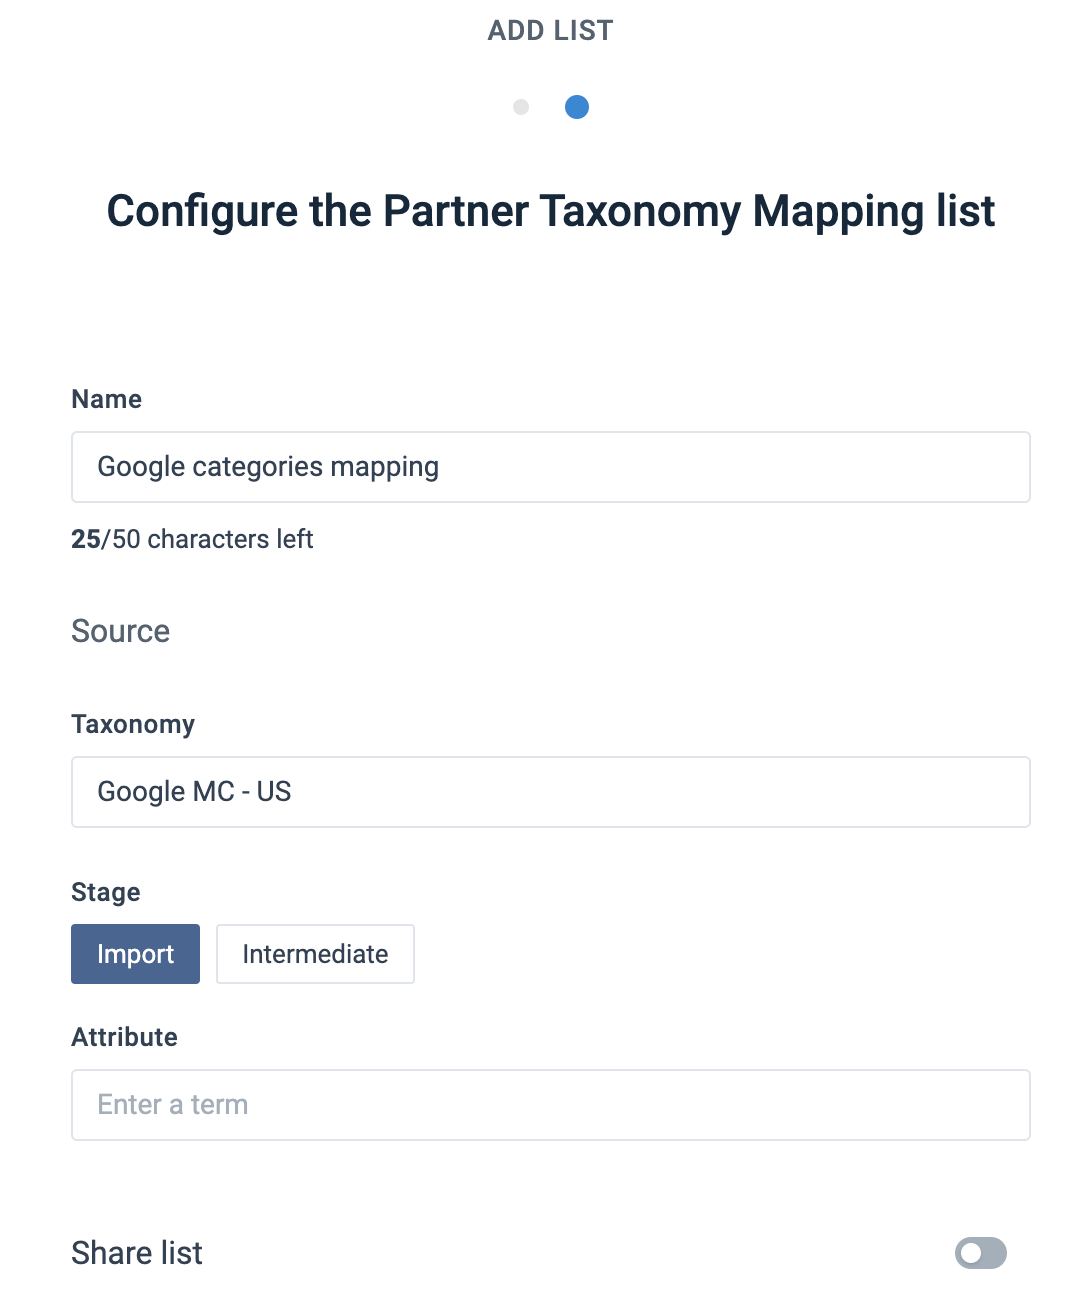 Add a Partner Taxonomy Mapping list for Google categories